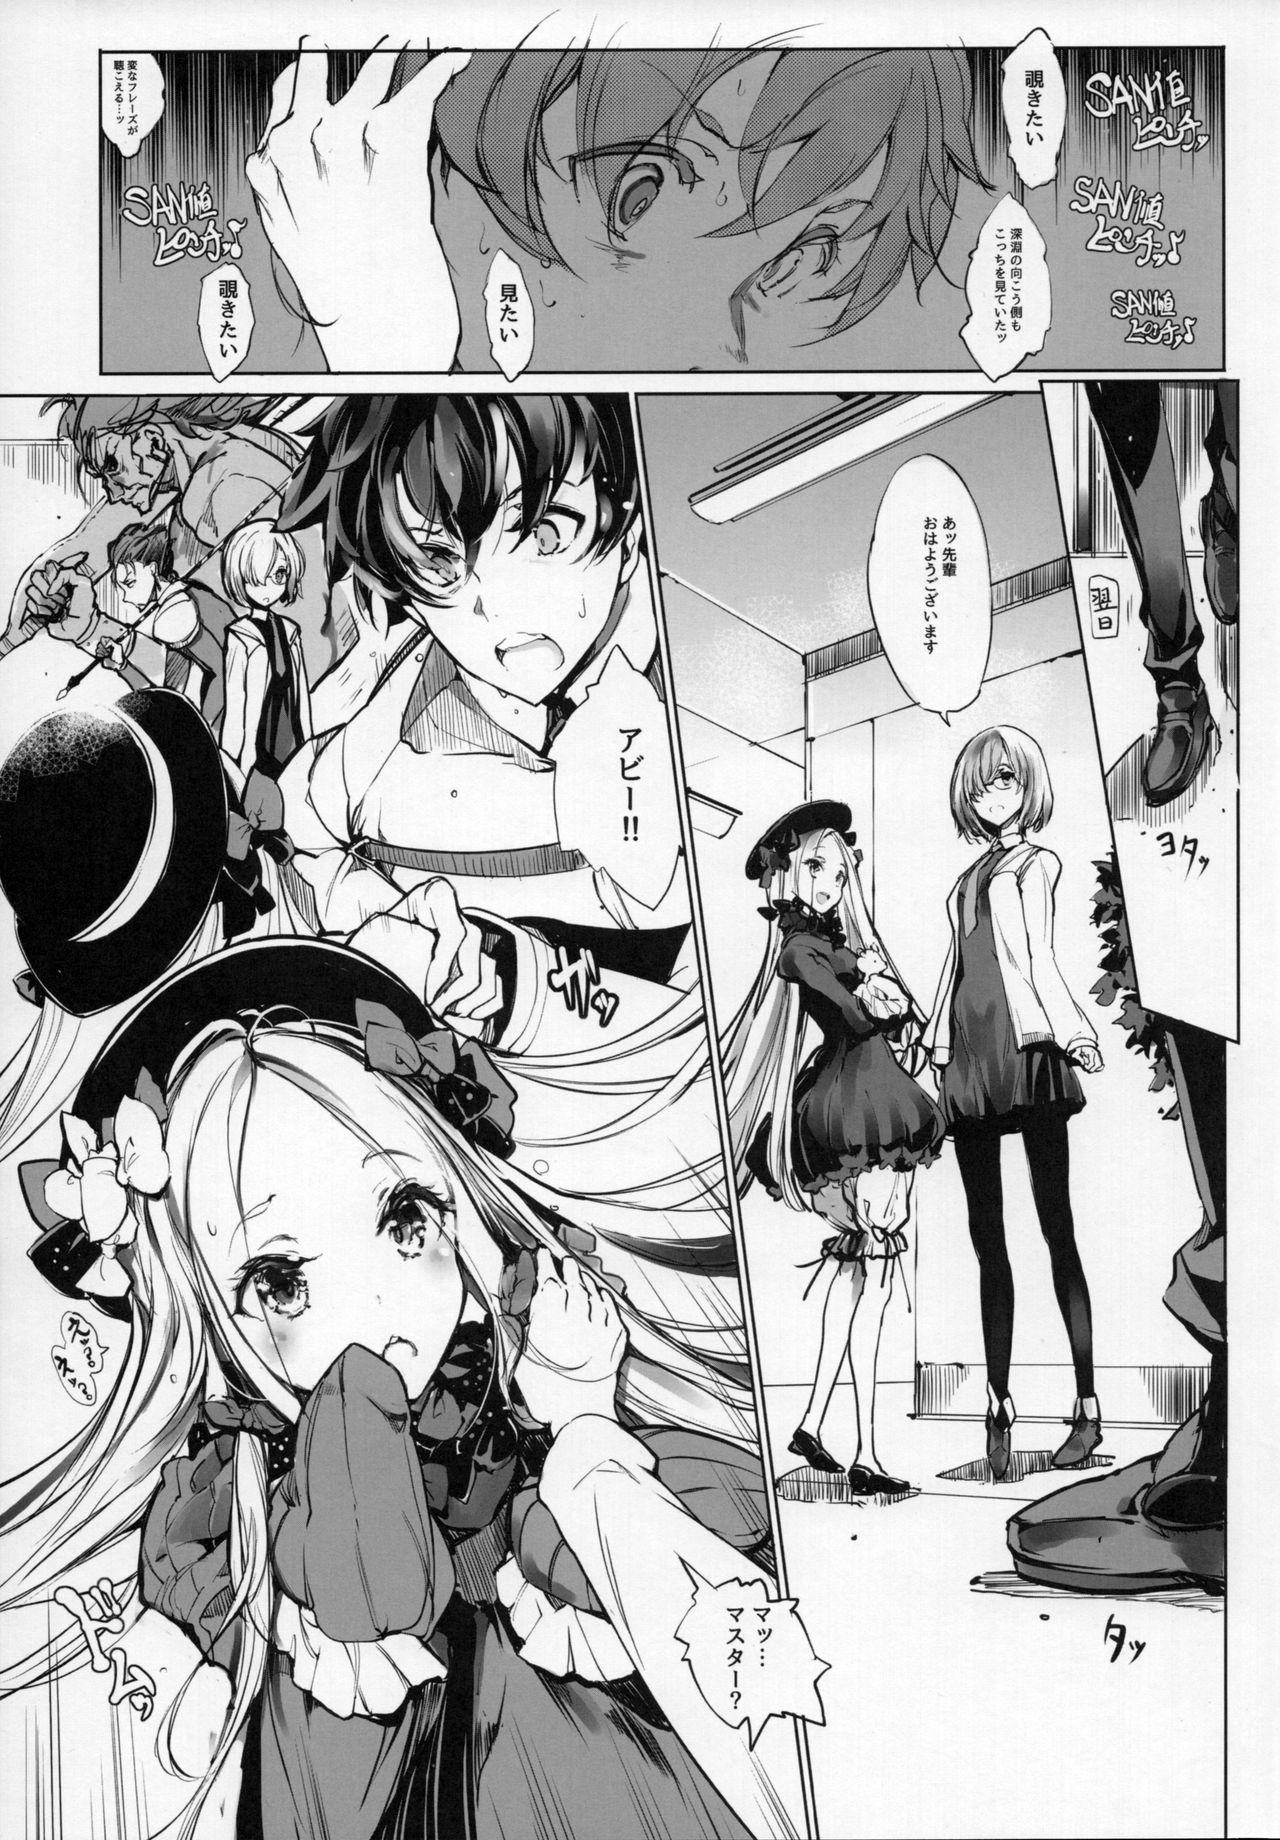 Hardcore Rough Sex Sen no Ko o Haramu Mori no Shoujo - The girl of the woods with a thousand young - Fate grand order Jerk Off - Page 6